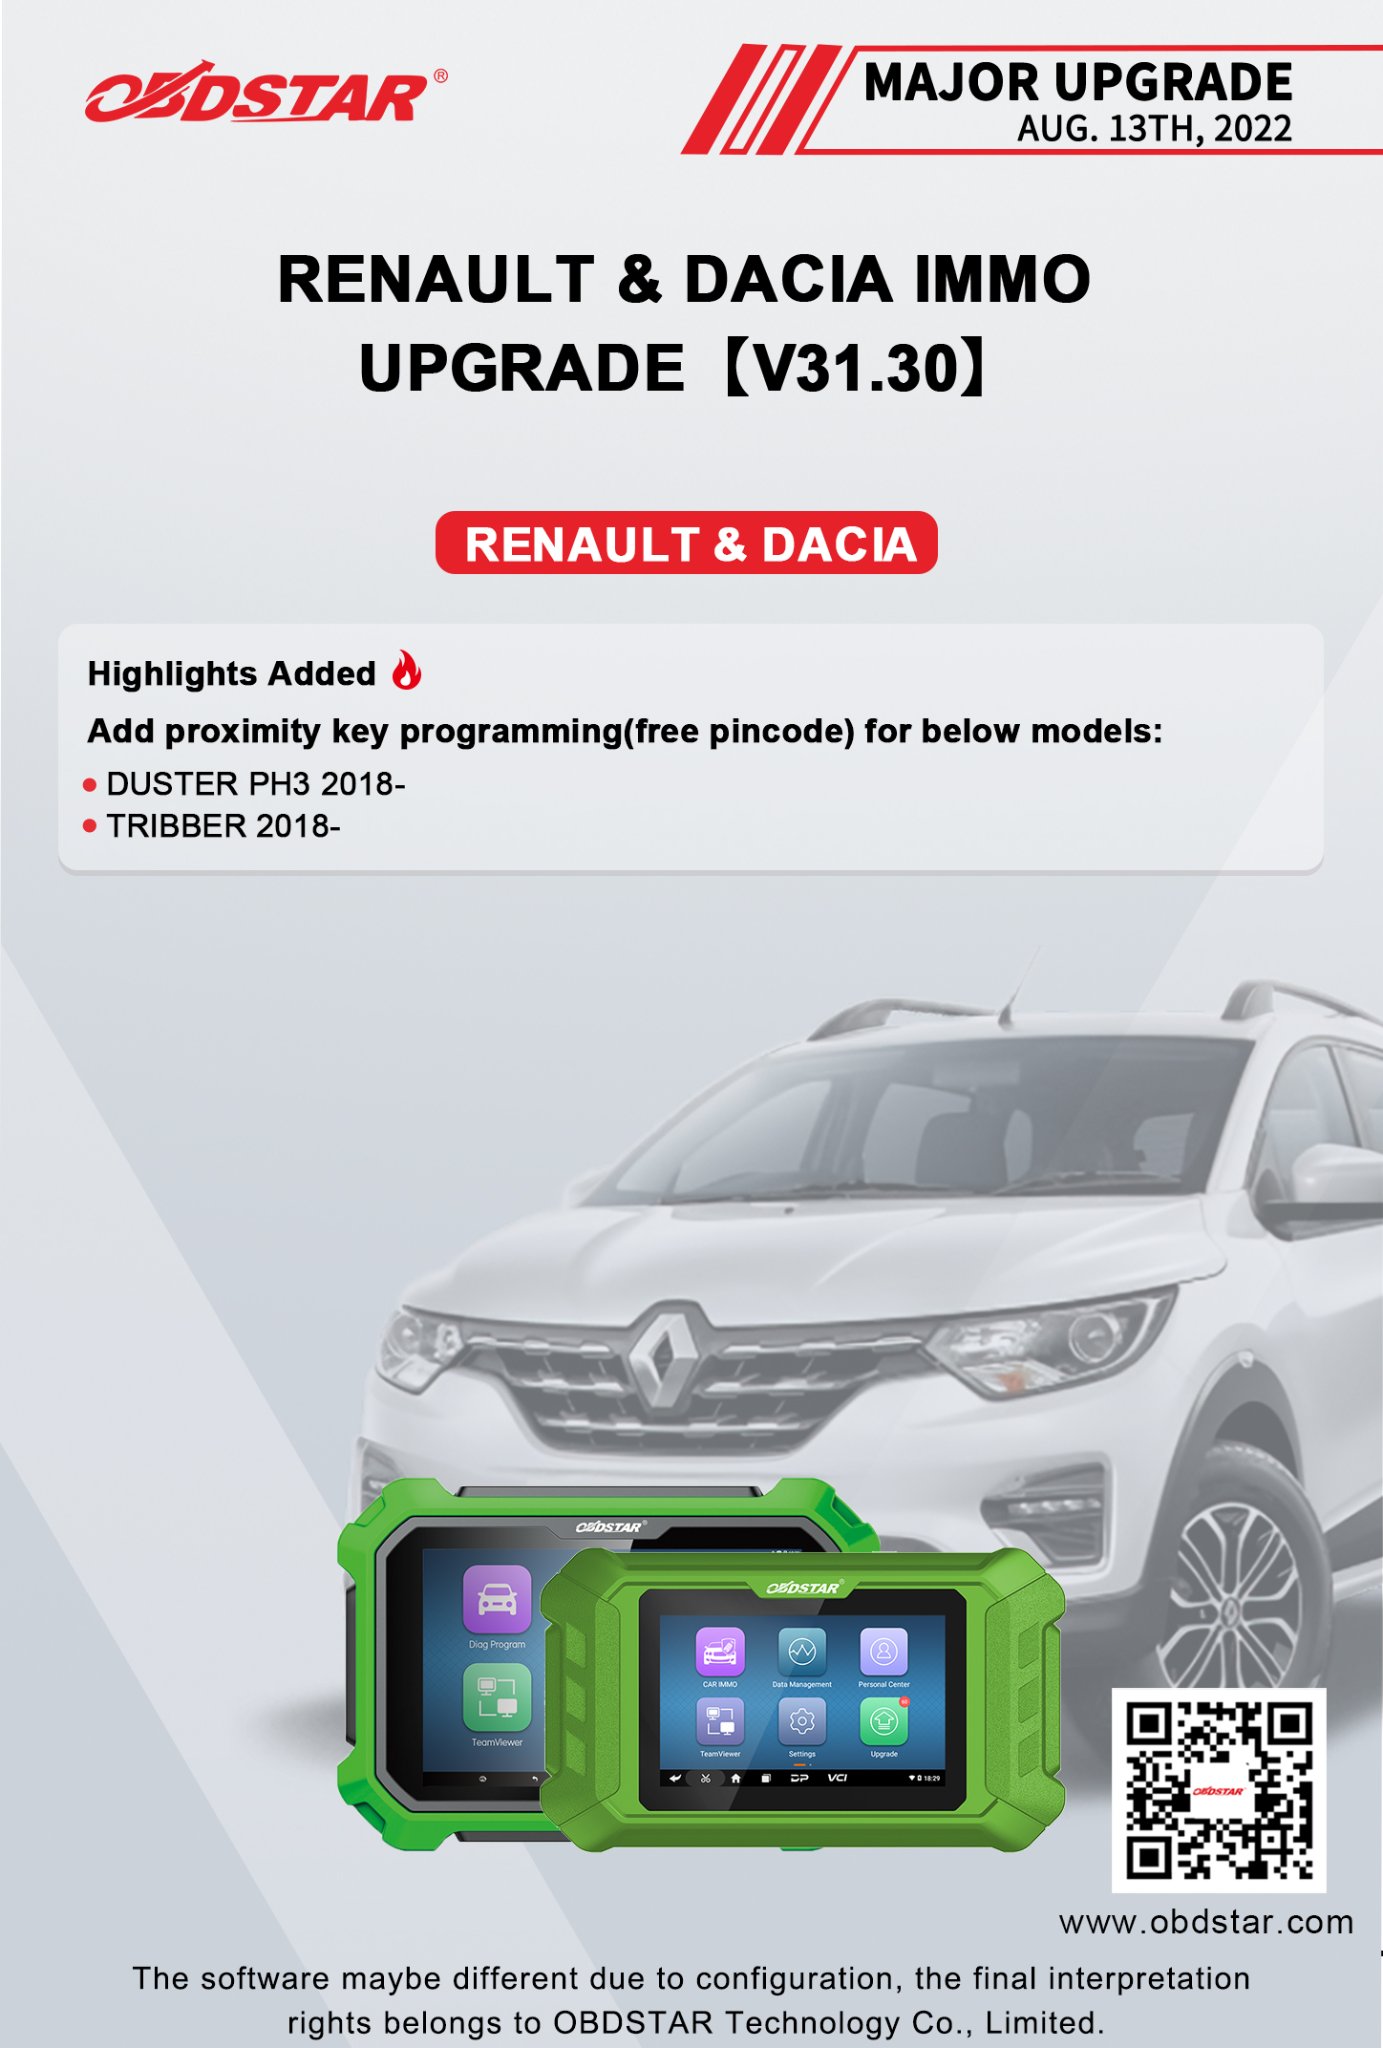 RENAULT & DACIA V31.30 IMMO Upgrade on OBDSTAR X300 DP Plus and X300 MINI CHRYSLER and X300 Pro4